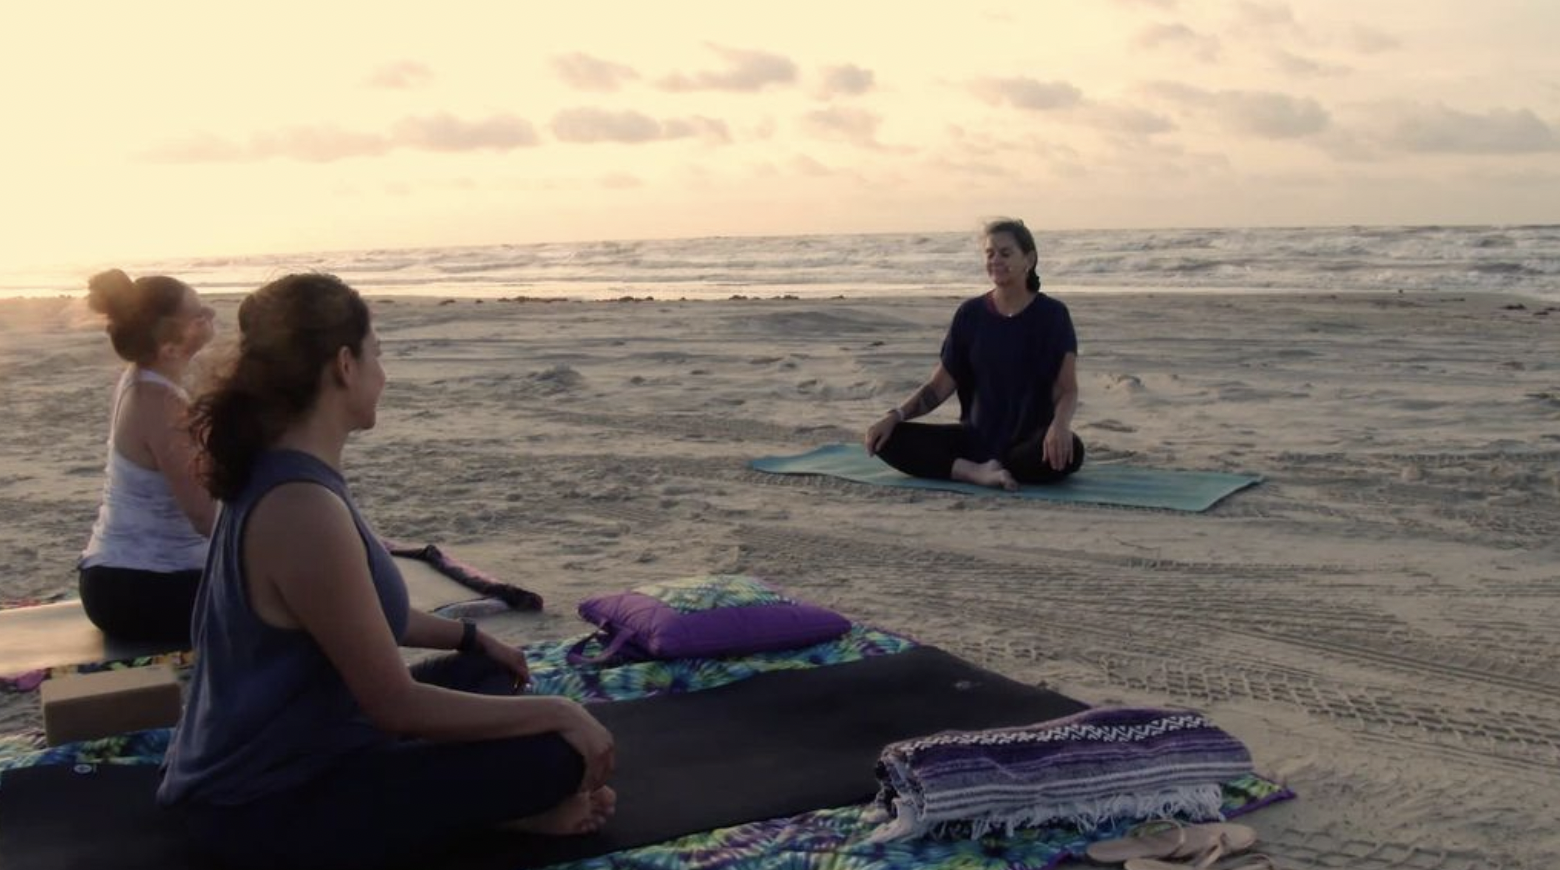 Check out what's new on Holy Yoga TV this week!